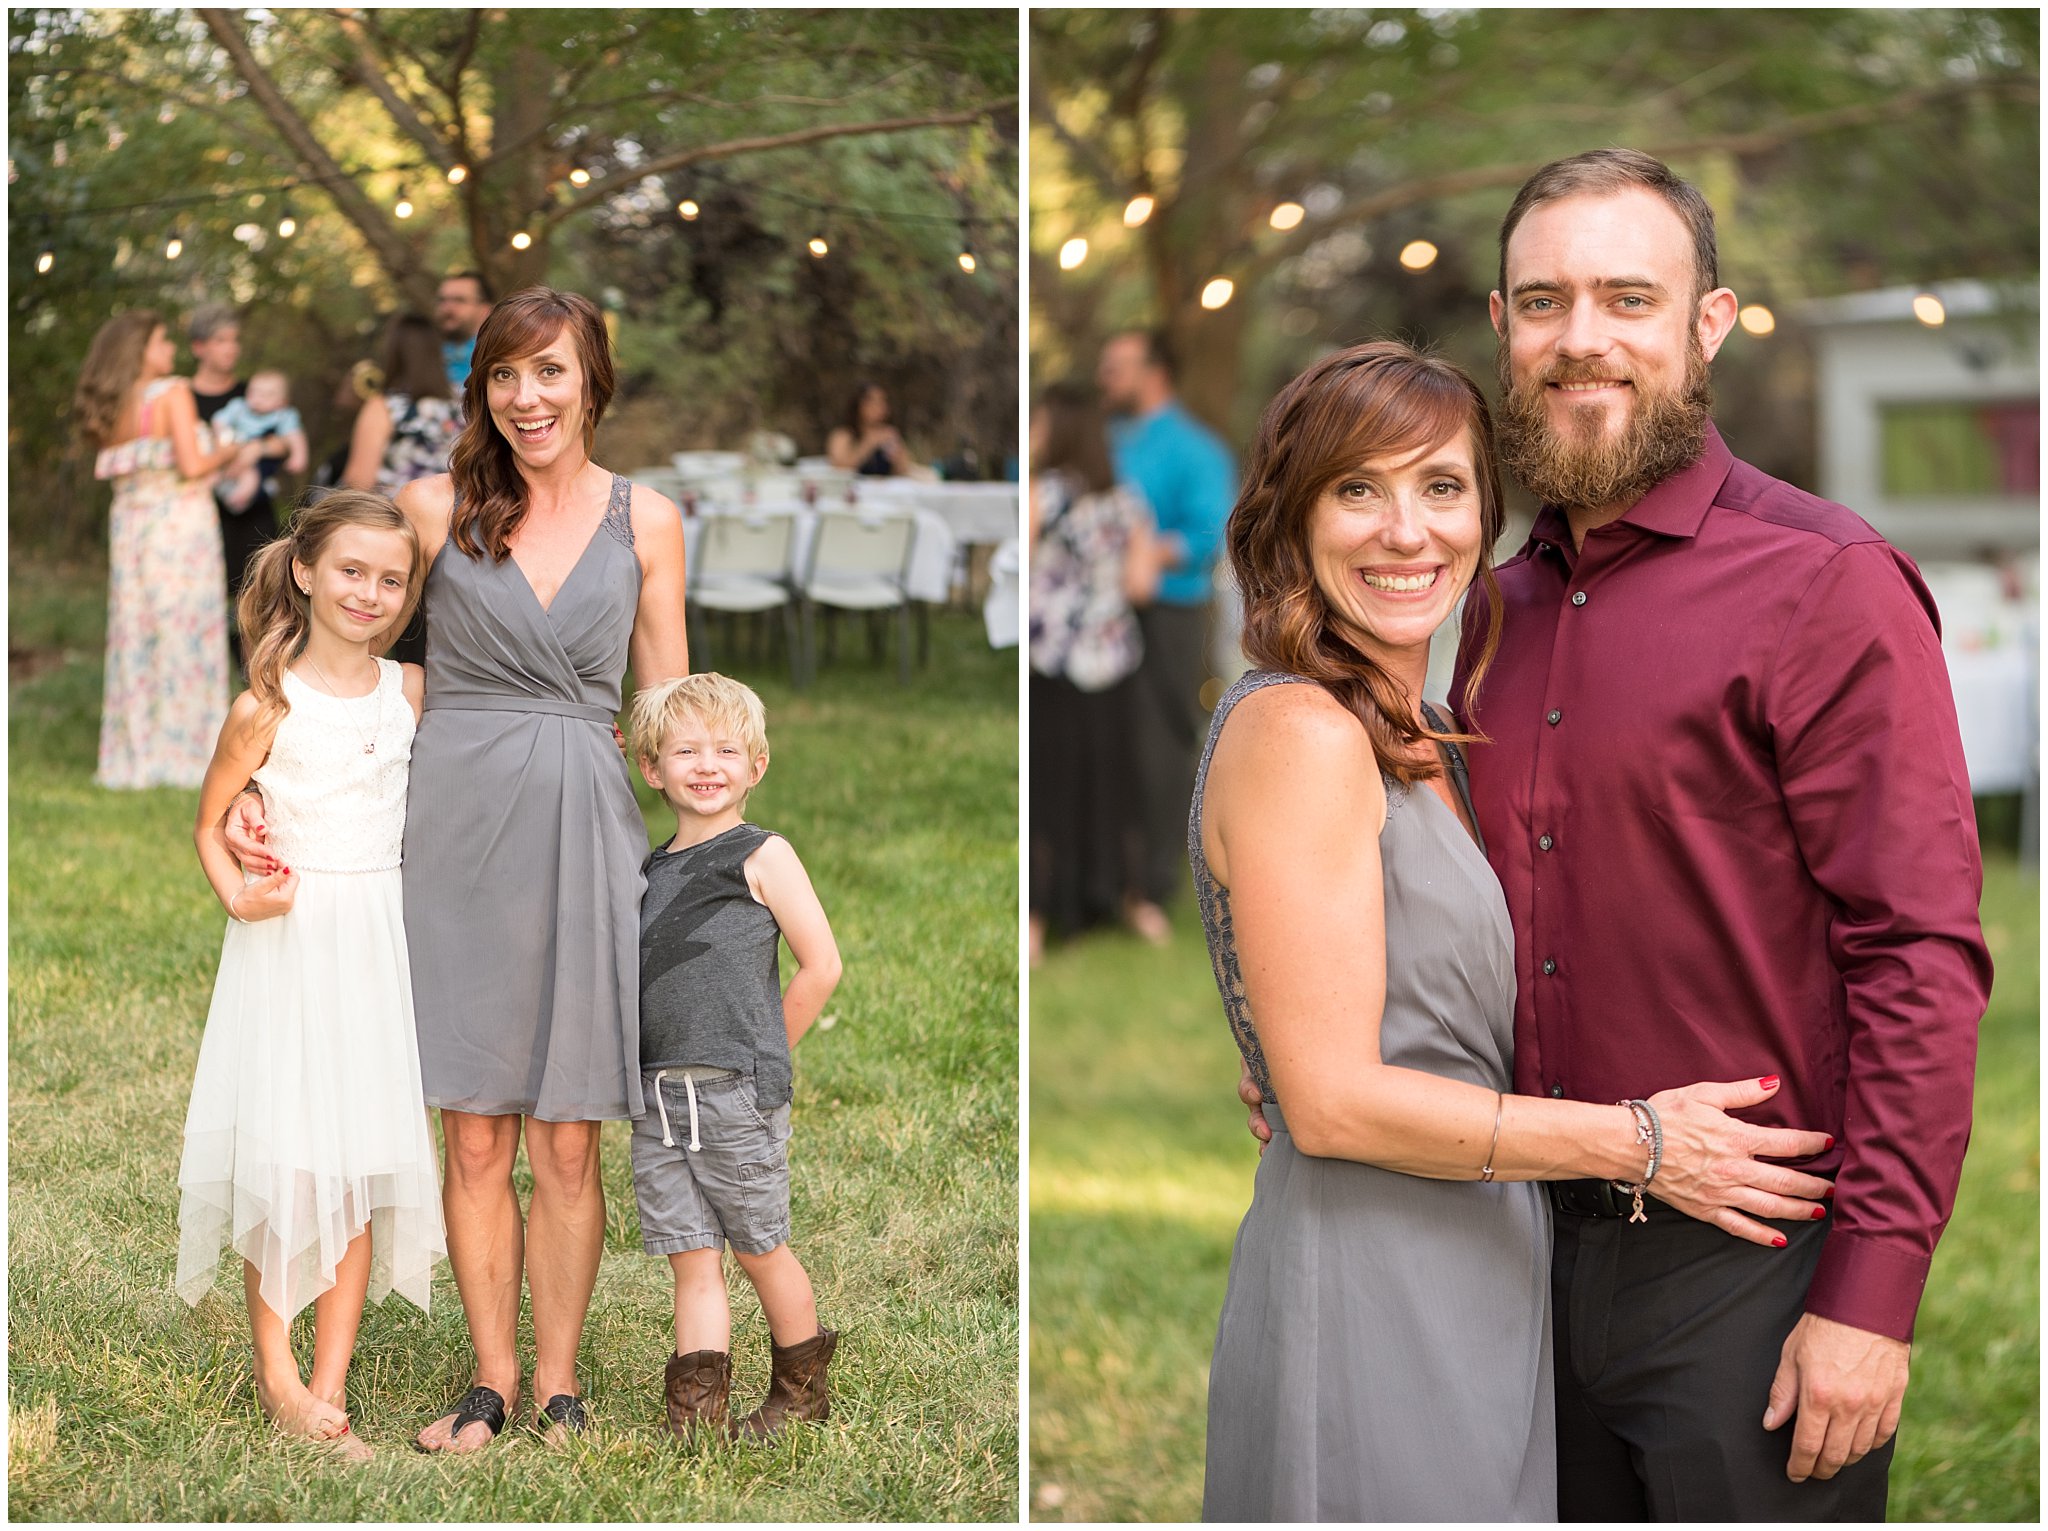 Candid, cute guest pictures wedding reception | Red and Grey wedding | Davis County Outdoor Wedding | Jessie and Dallin Photography